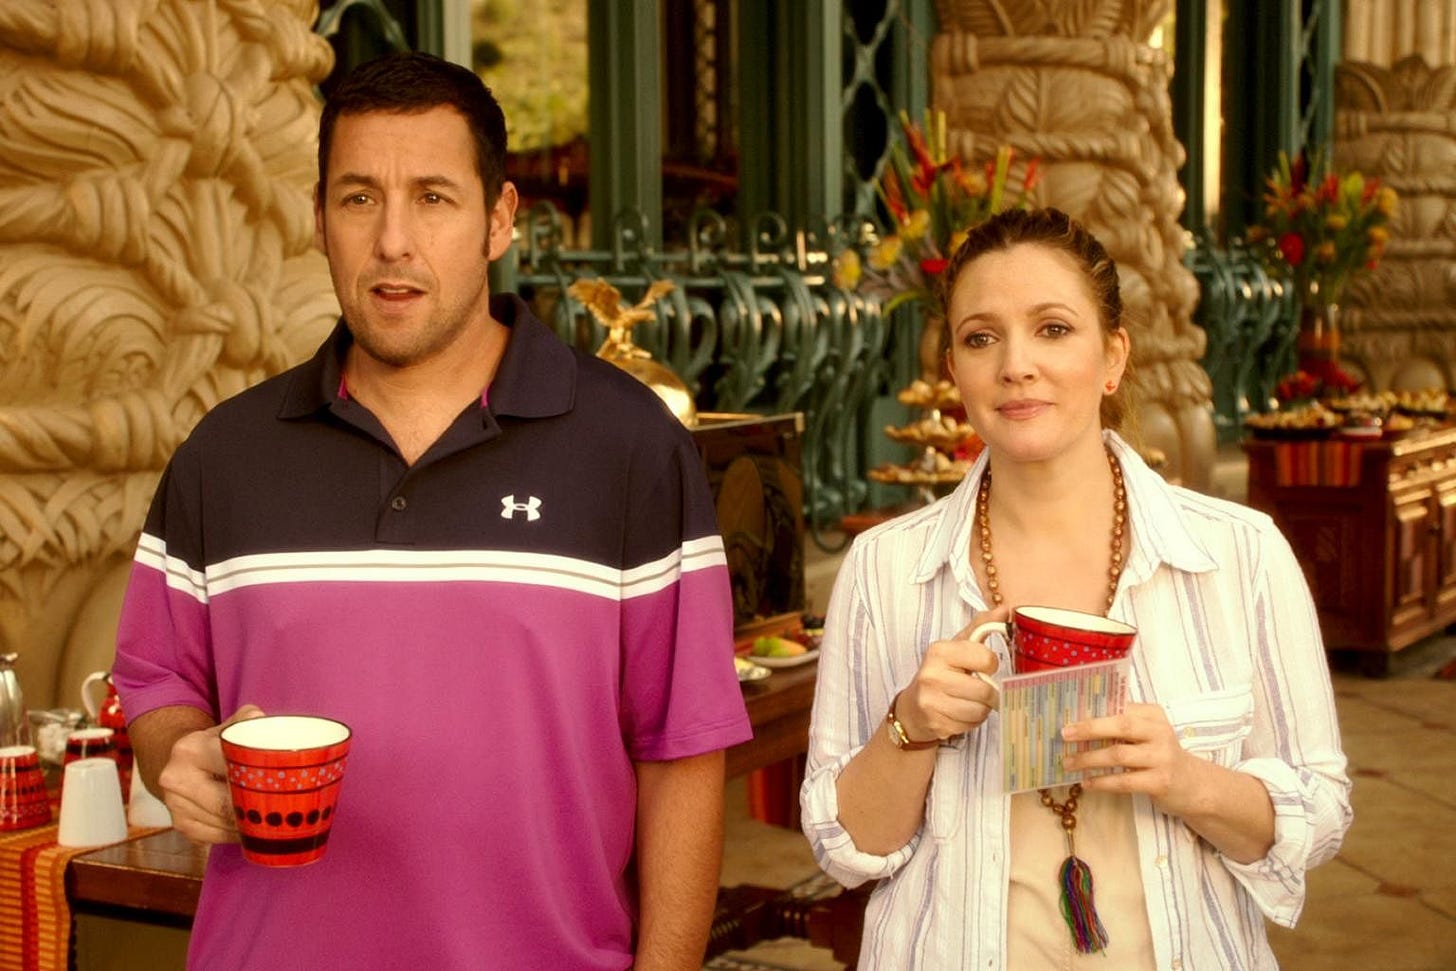 Adam Sandler is up for making another movie with frequent co-star Drew  Barrymore, Entertainment News & Top Stories - The Straits Times